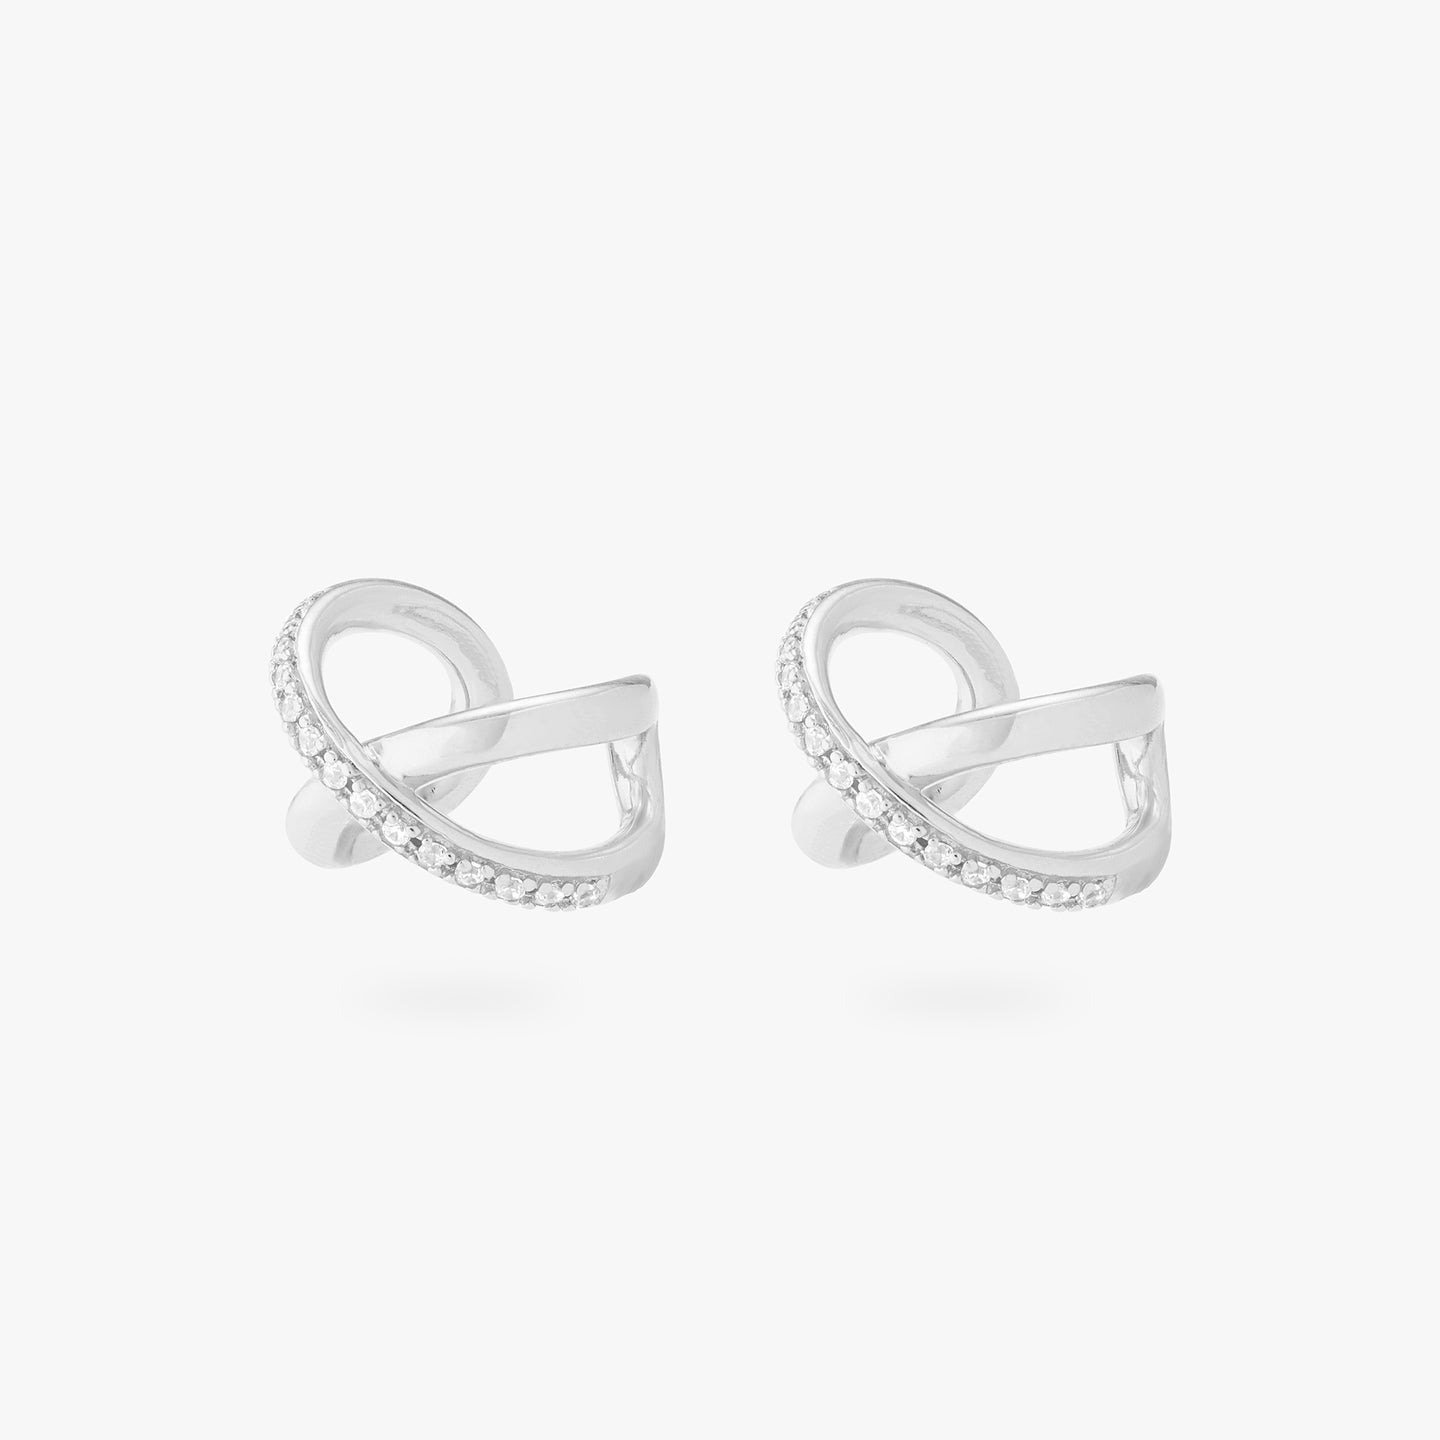 This is an image of a pair of silver twist cuffs that have one side of the twist diagonally lined with silver/clear CZs. [pair] color:null|silver/clear